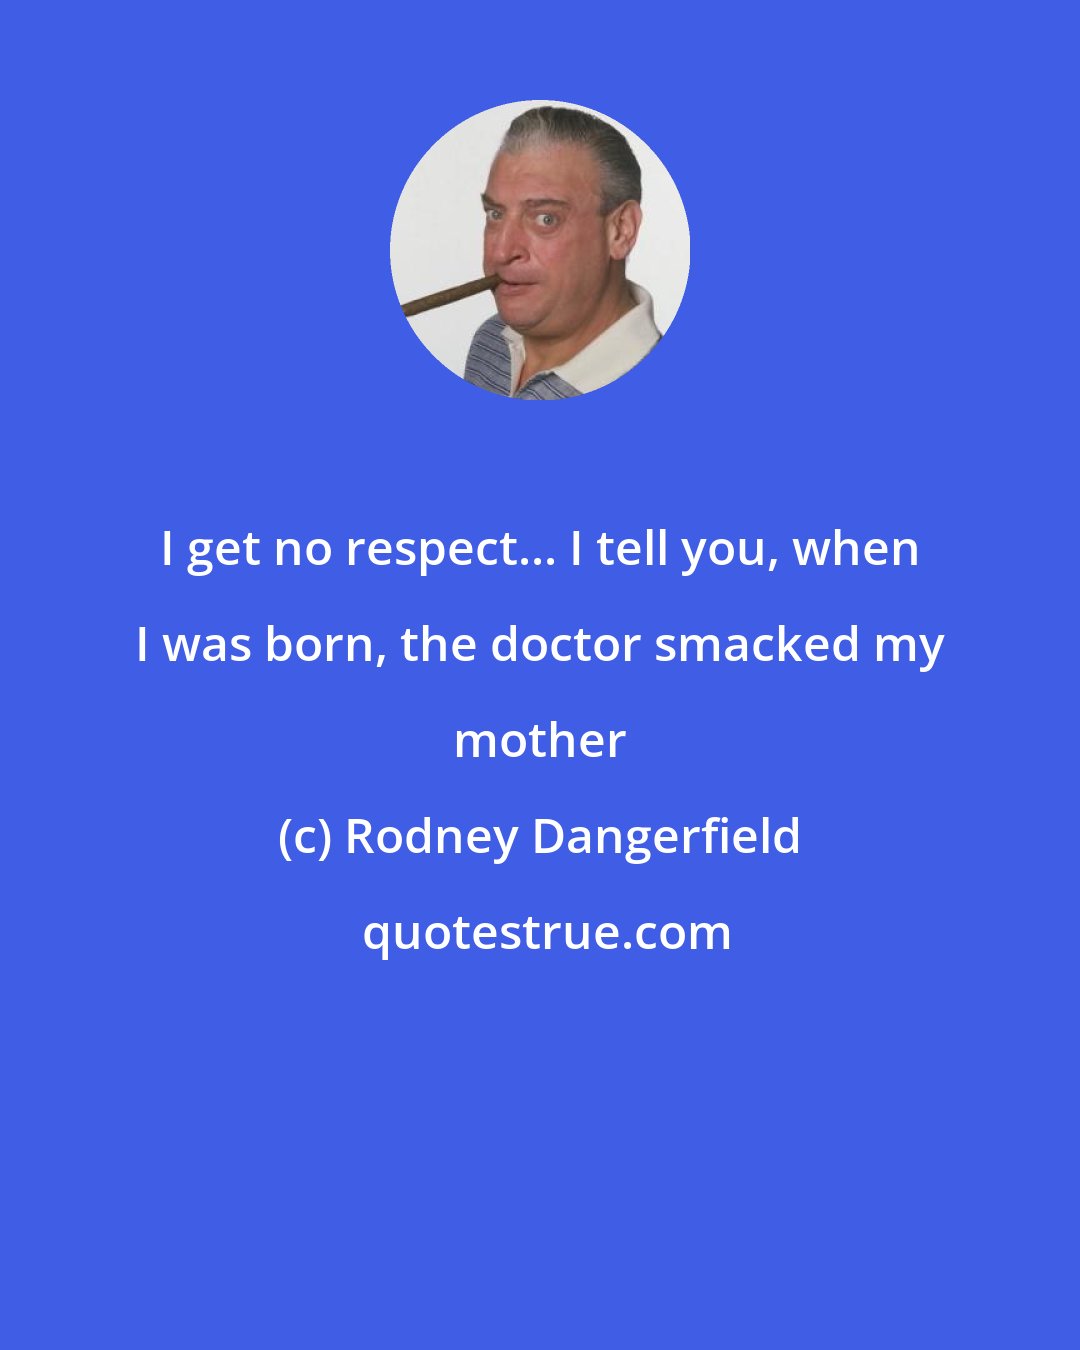 Rodney Dangerfield: I get no respect... I tell you, when I was born, the doctor smacked my mother